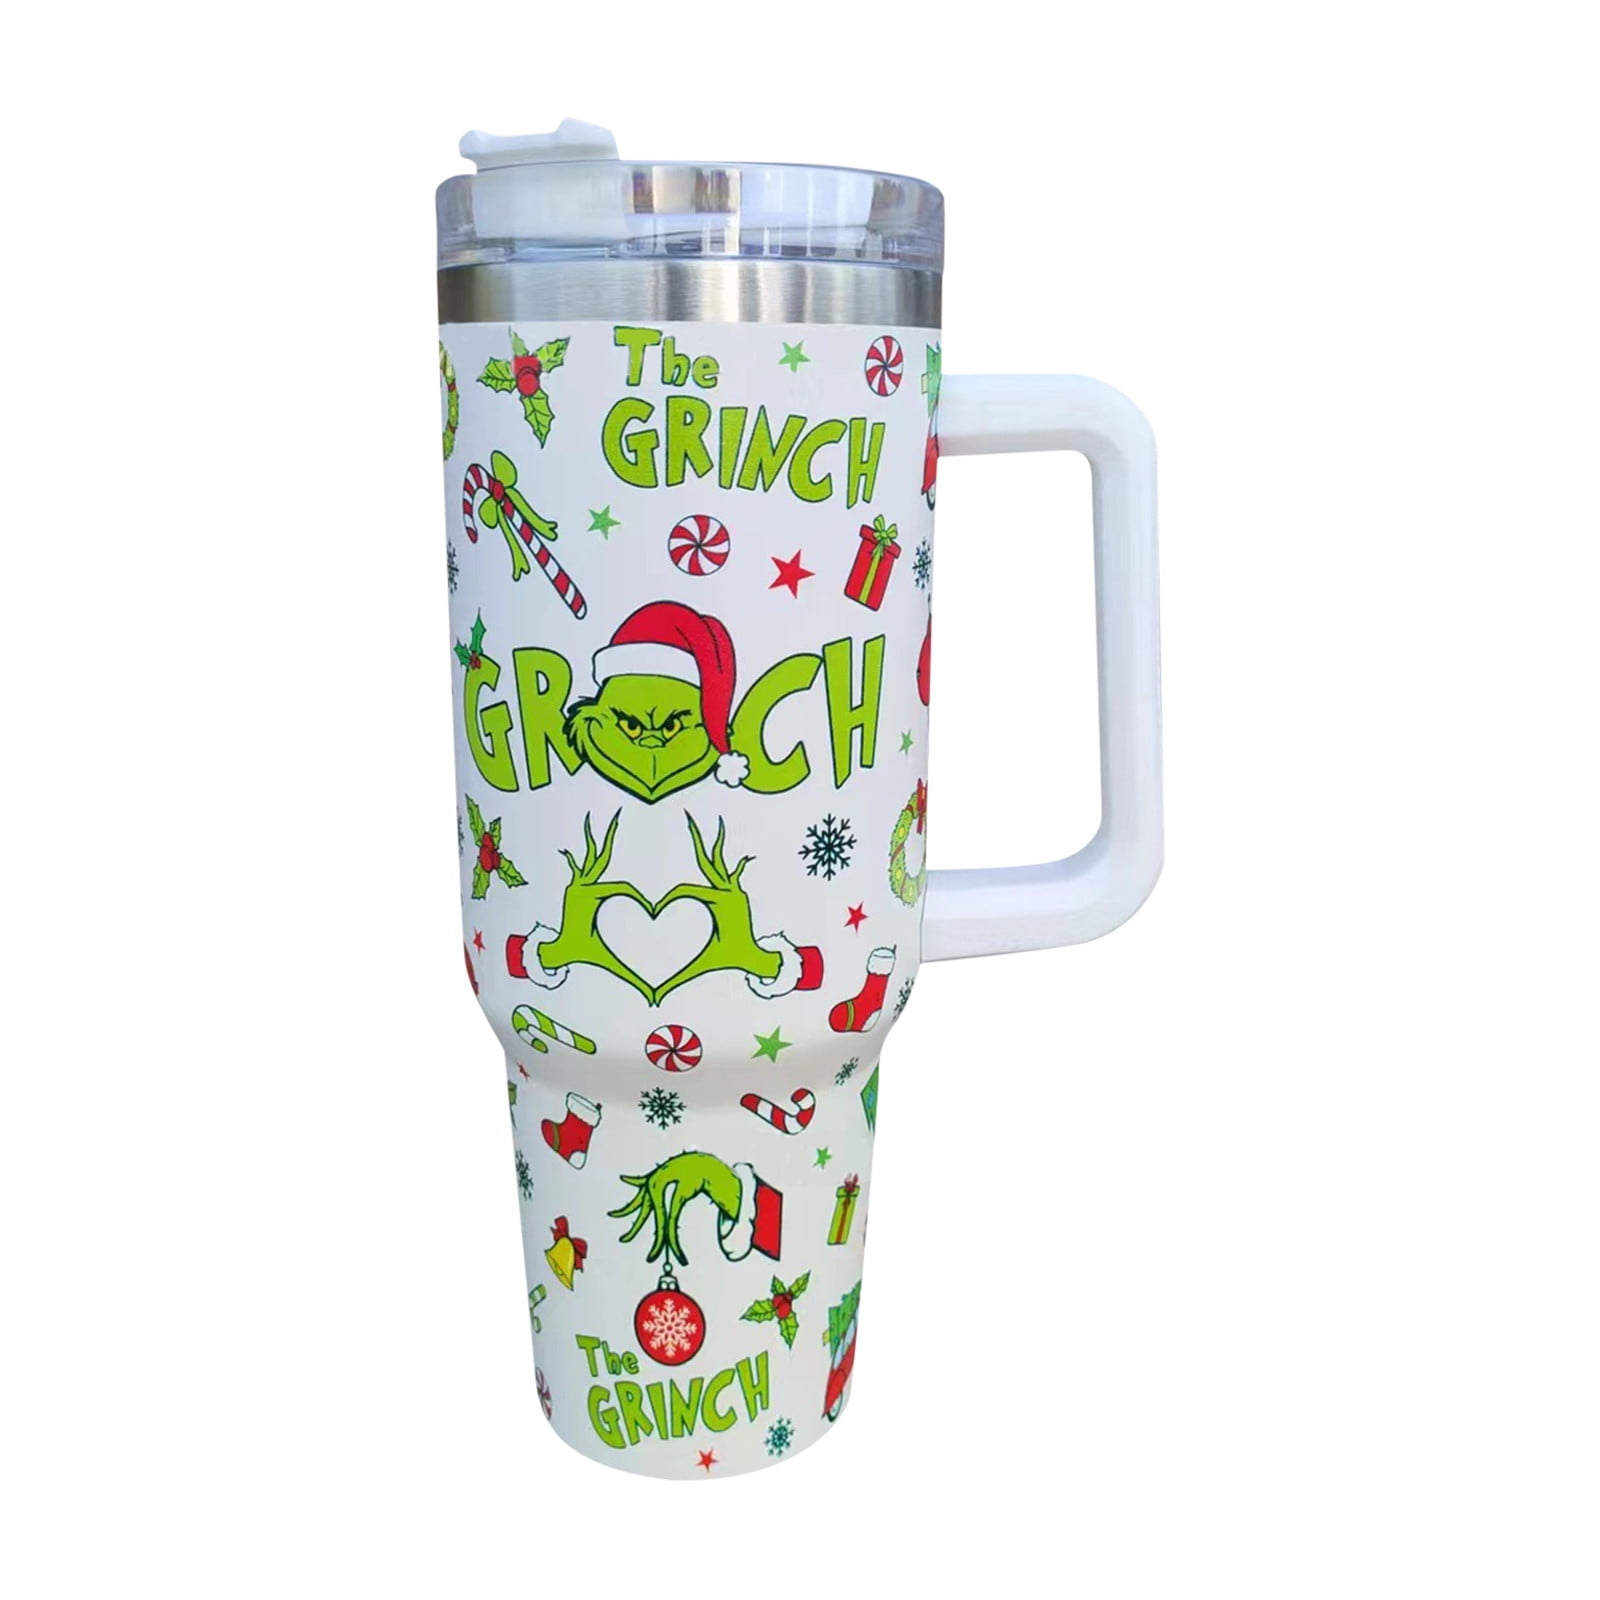 Christmas Theme Printed 40oz Double Wall Stainless Steel Vac (7319255)